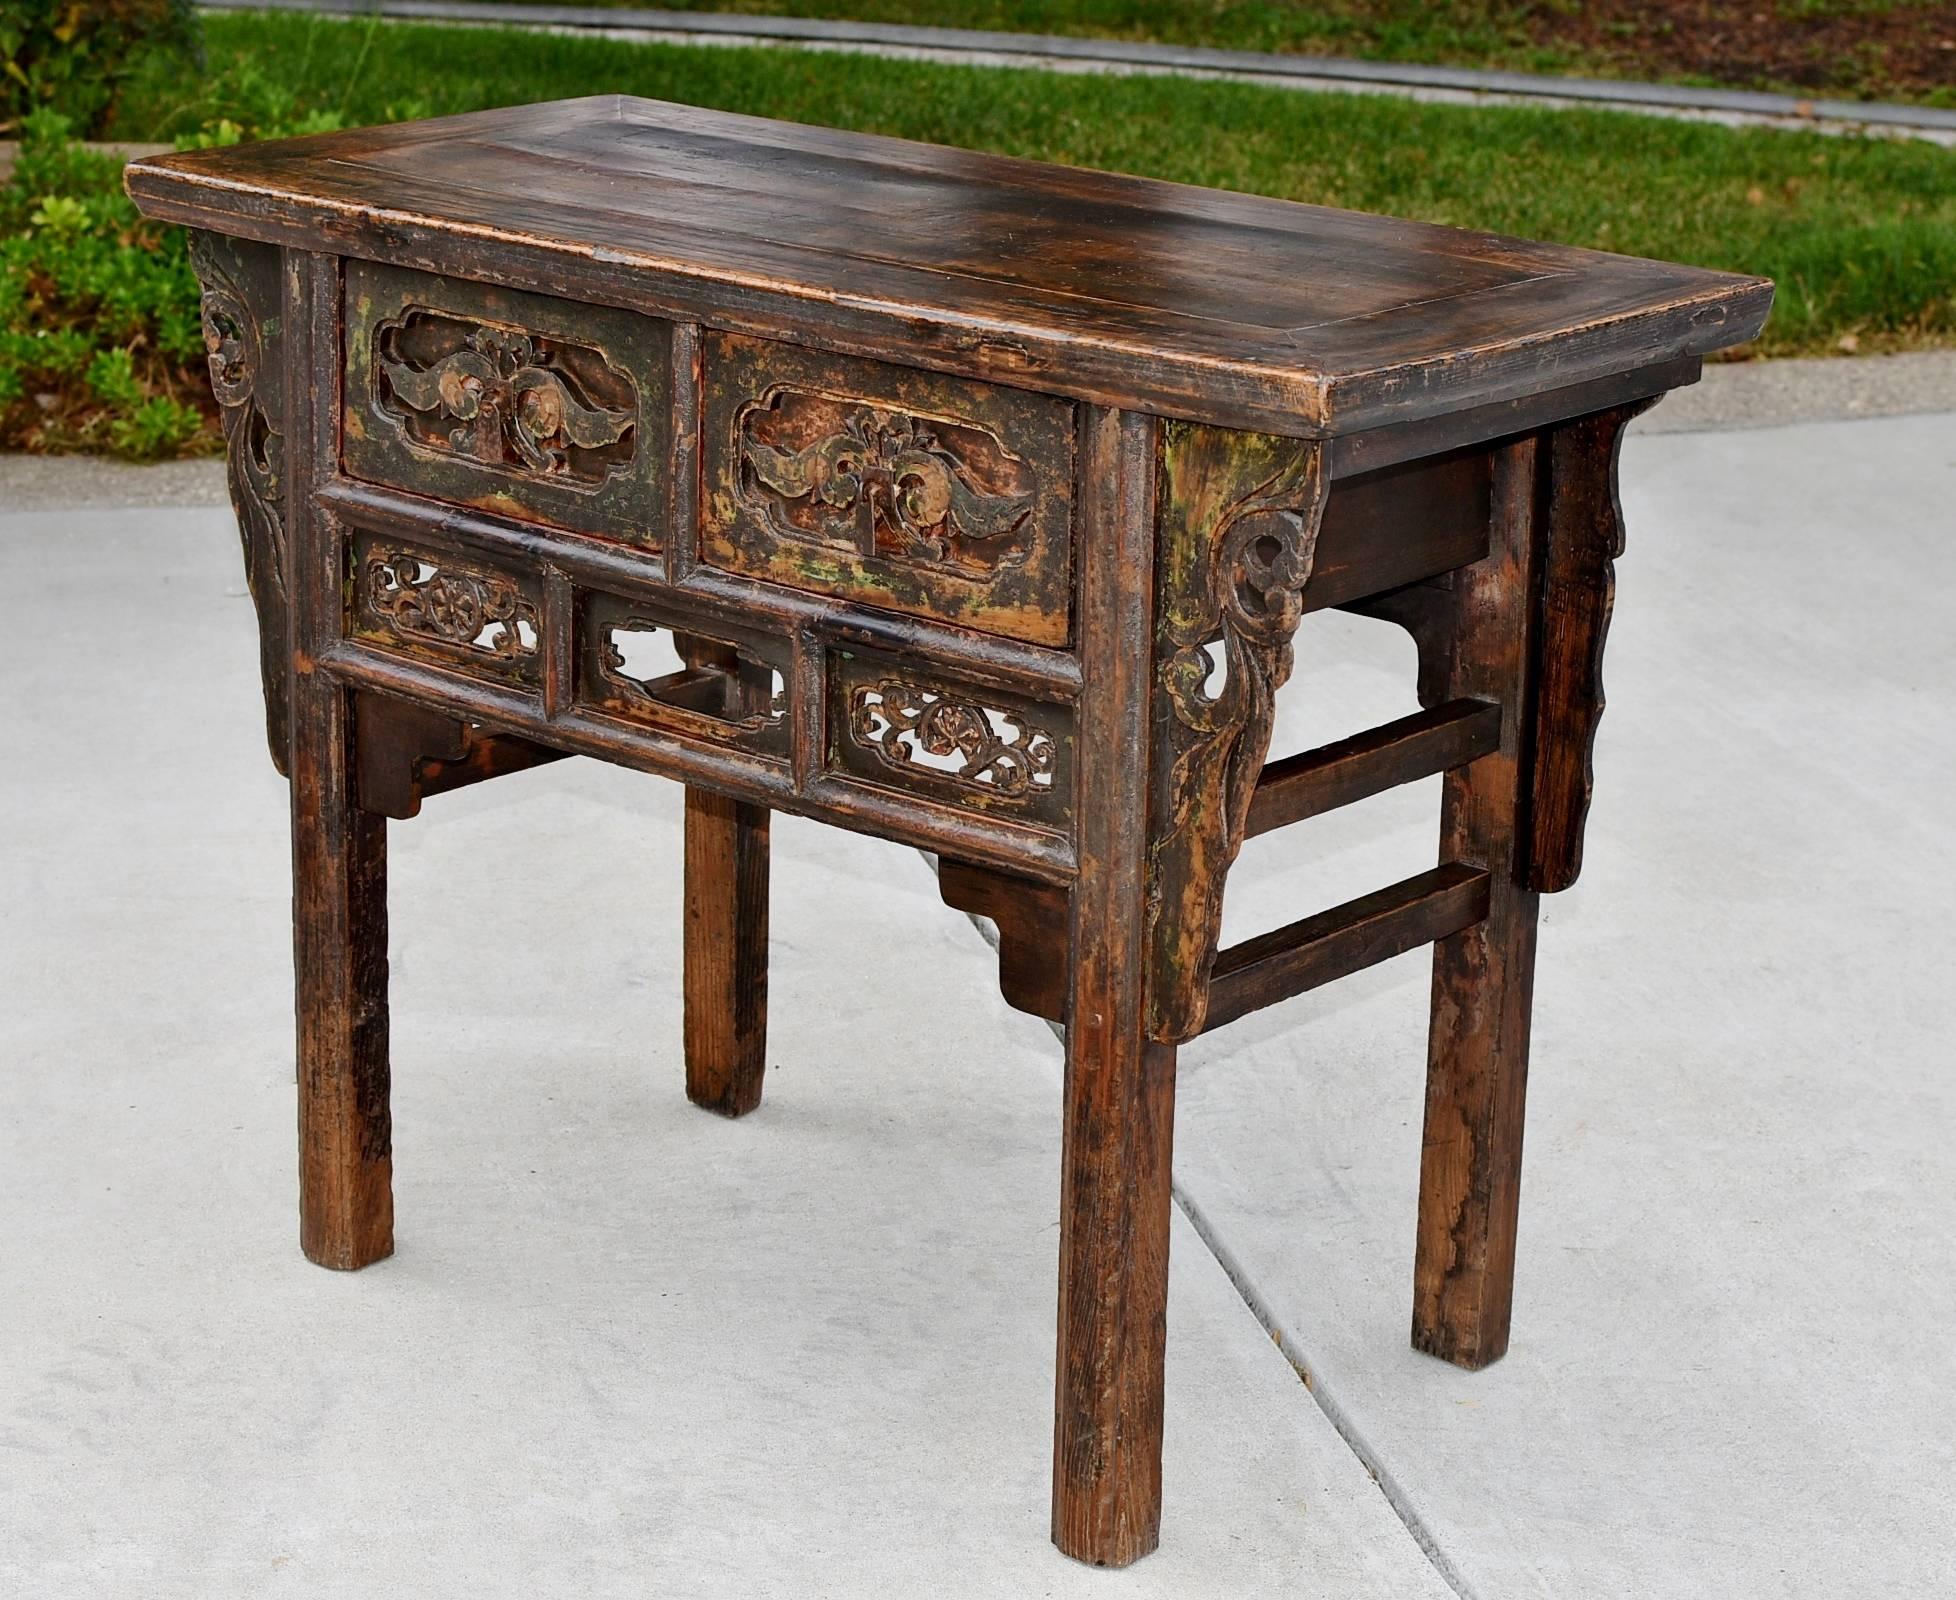 19th Century, Carved Table, Chinese Antique Table with Peony 5